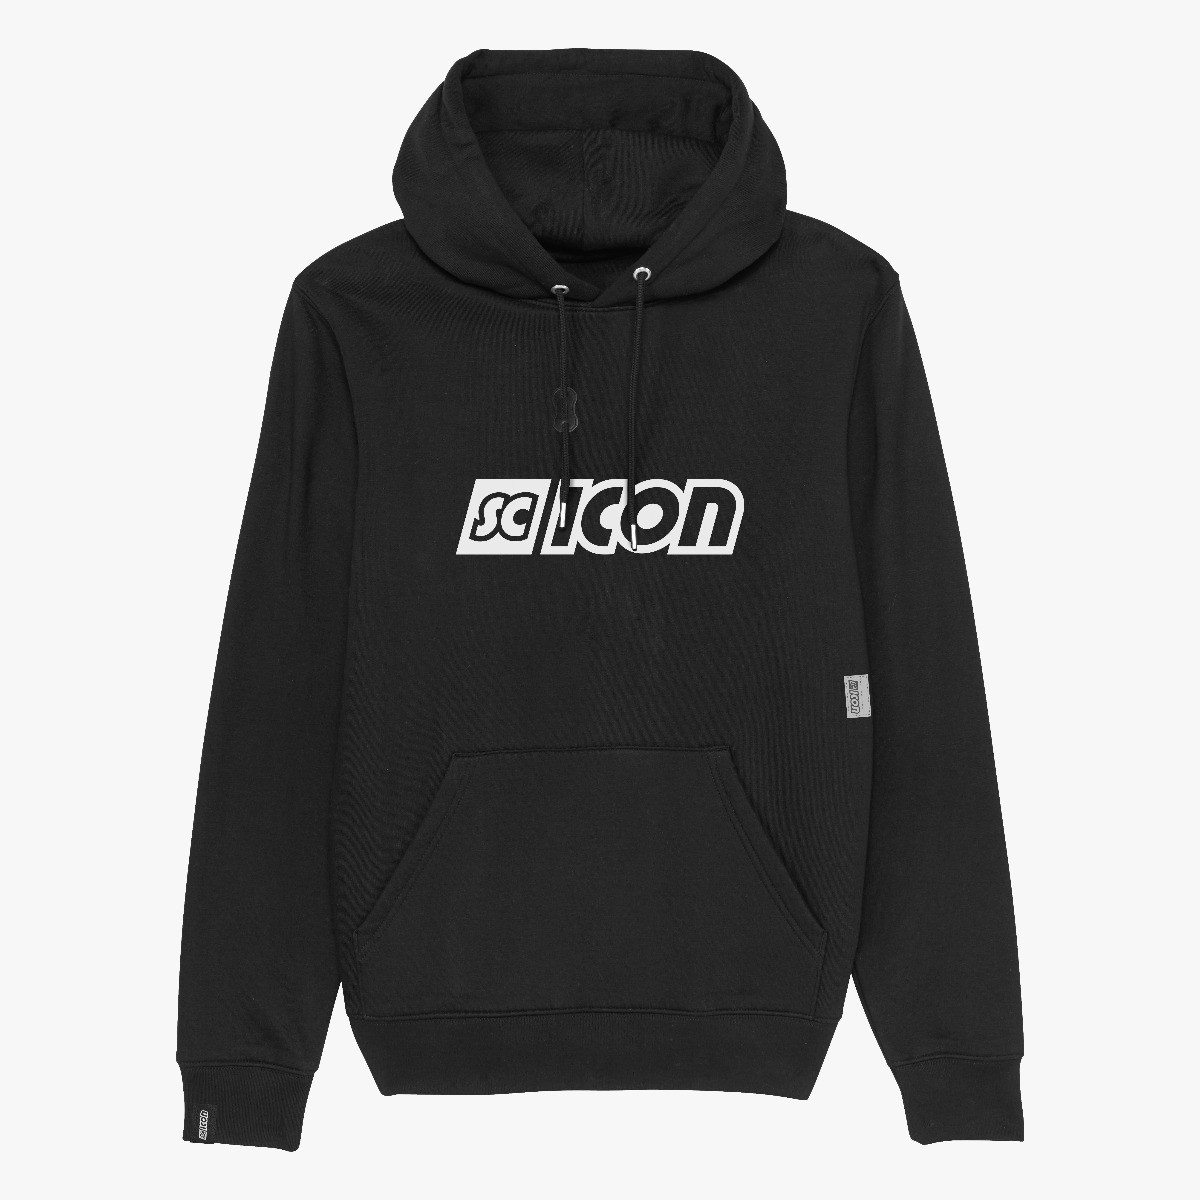 SCICON HOODIE